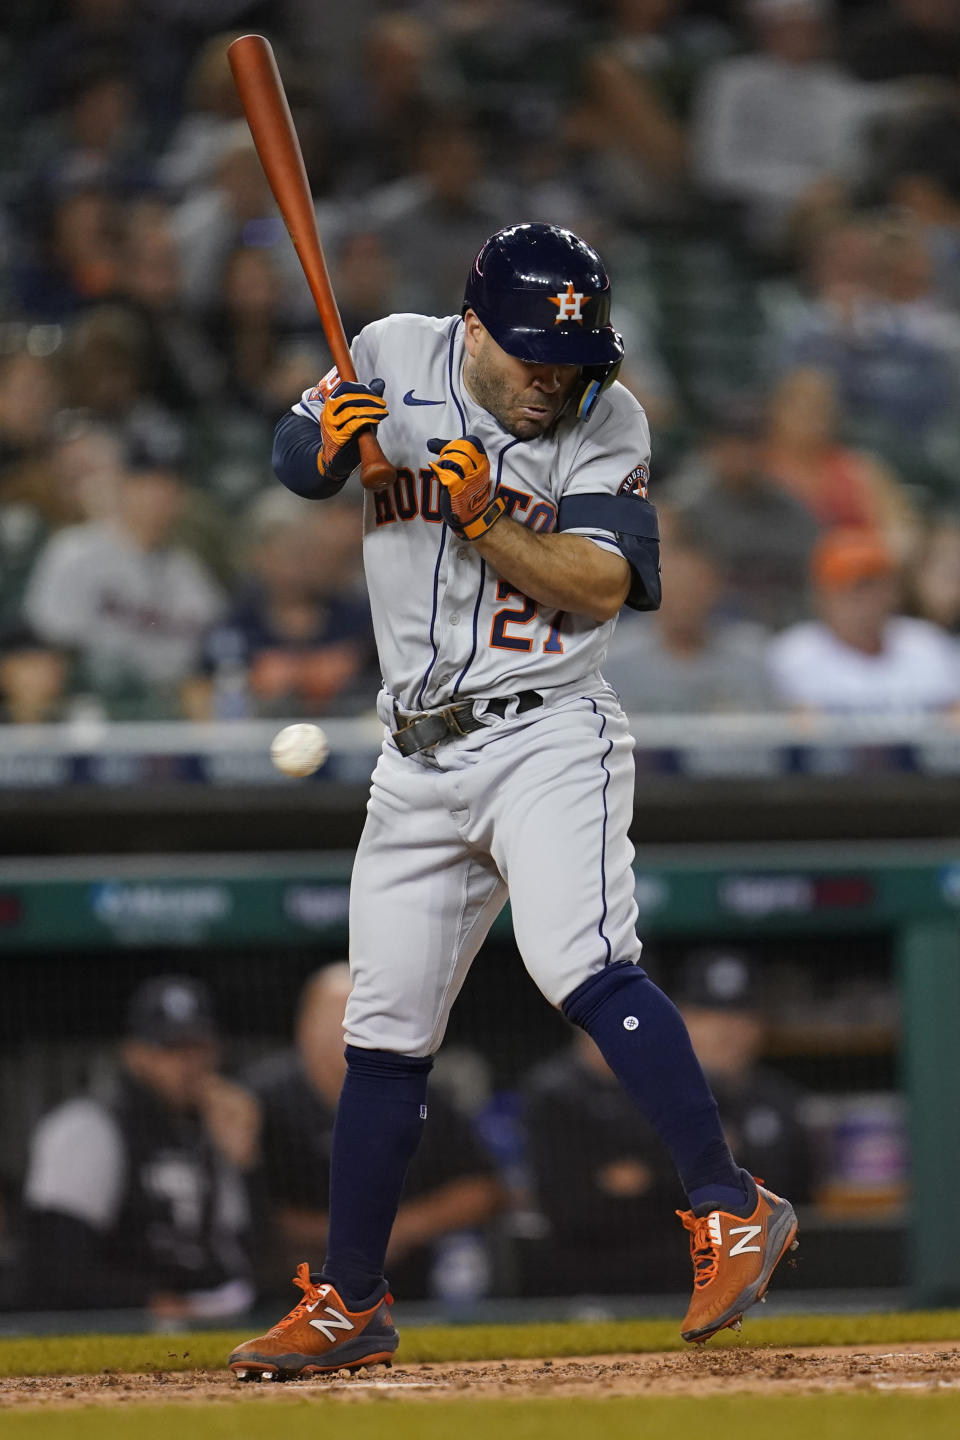 Houston Astros' Jose Altuve is hit by a pitch in the sixth inning of a baseball game against the Detroit Tigers in Detroit, Tuesday, Sept. 13, 2022. (AP Photo/Paul Sancya)